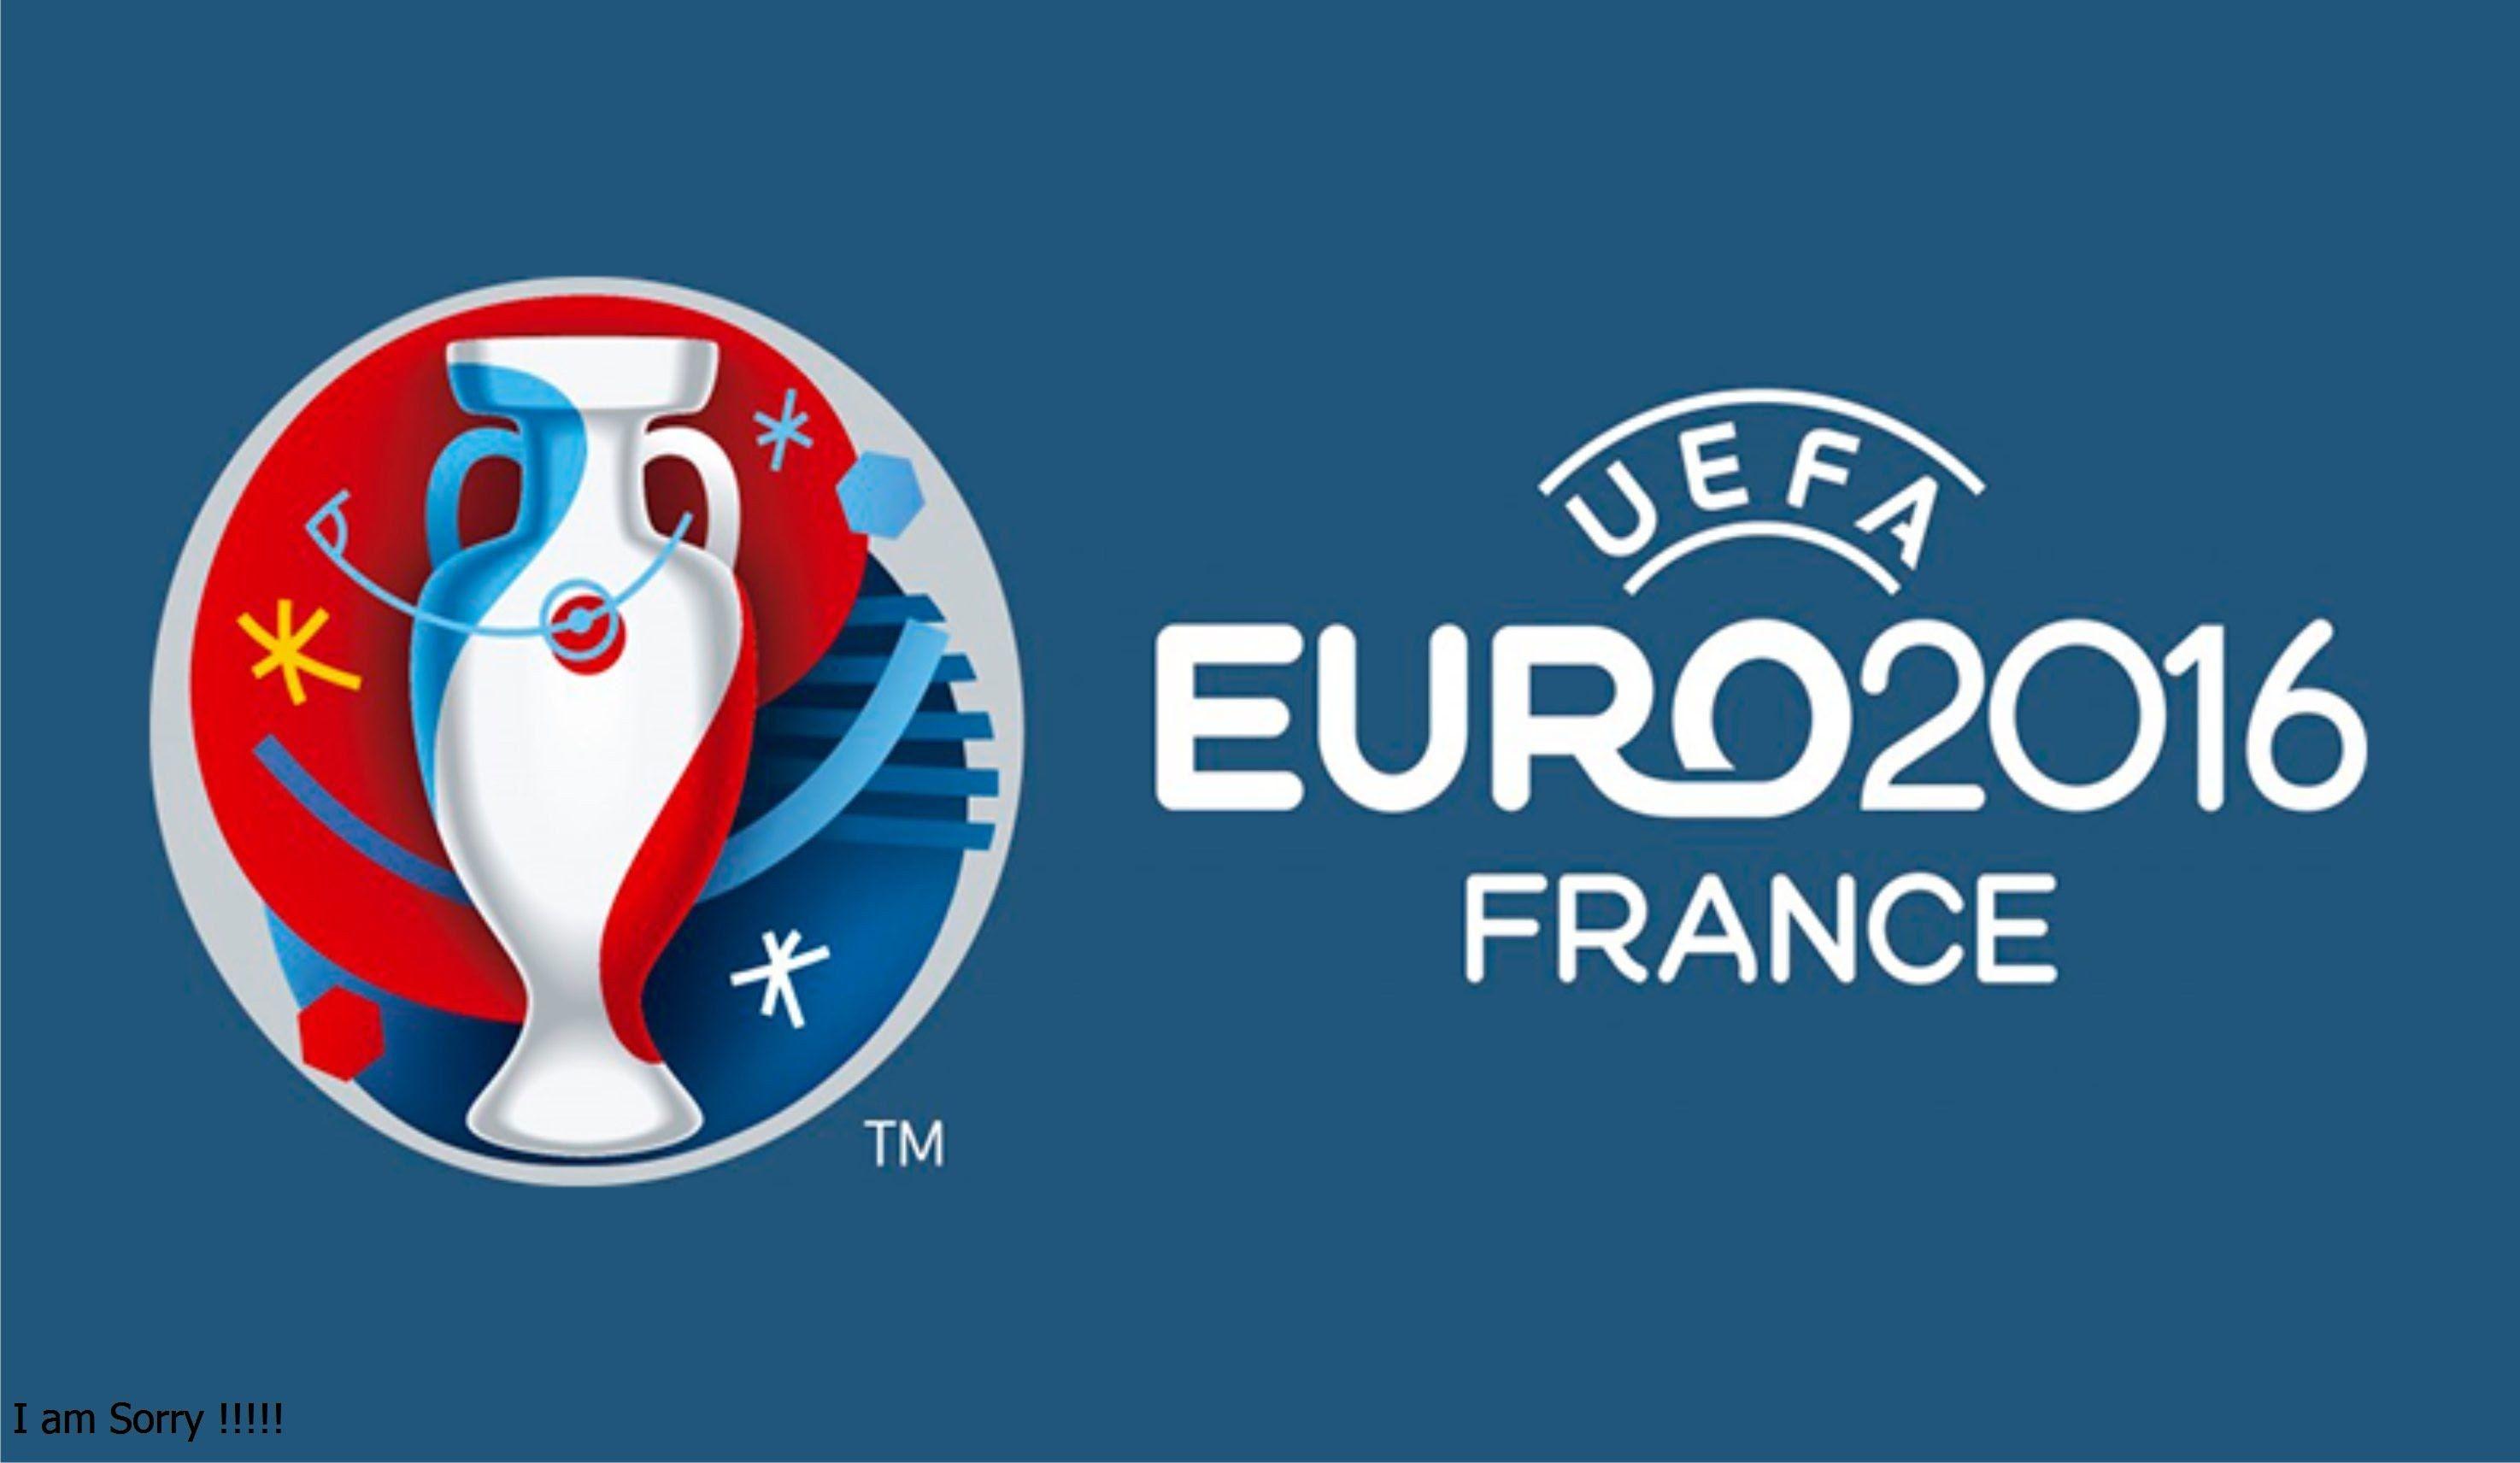 UEFA Euro 2016 Full HD Wallpaper and Background Imagex1712